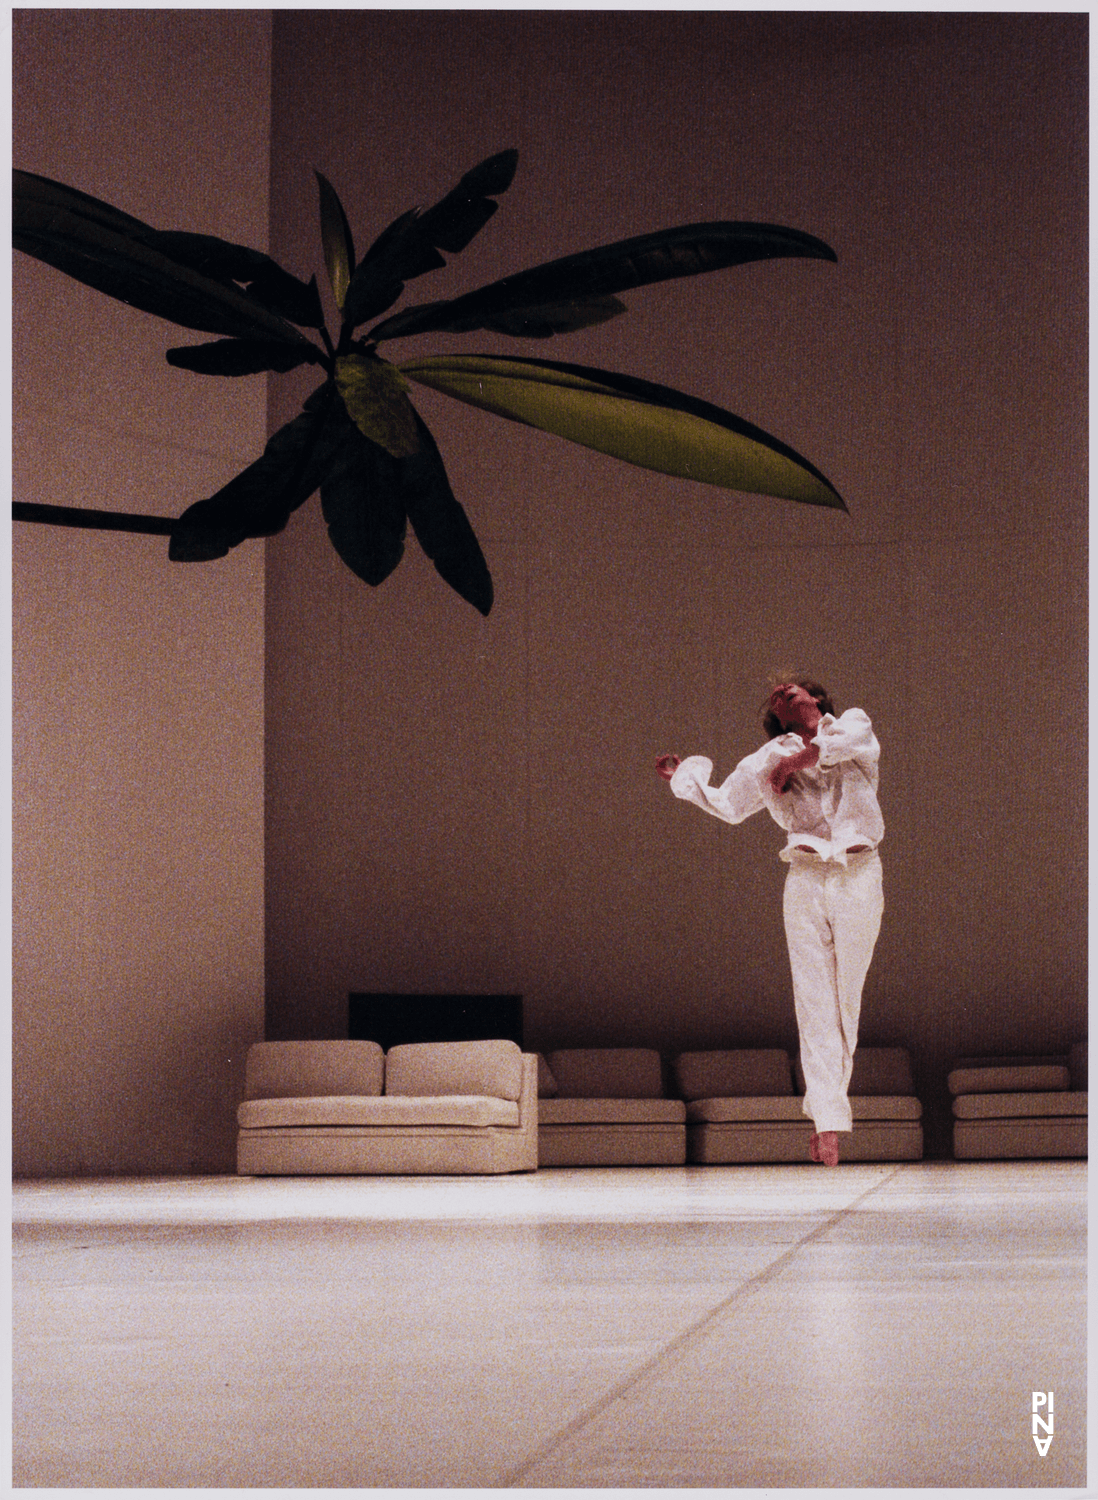 Dominique Mercy in “Água” by Pina Bausch